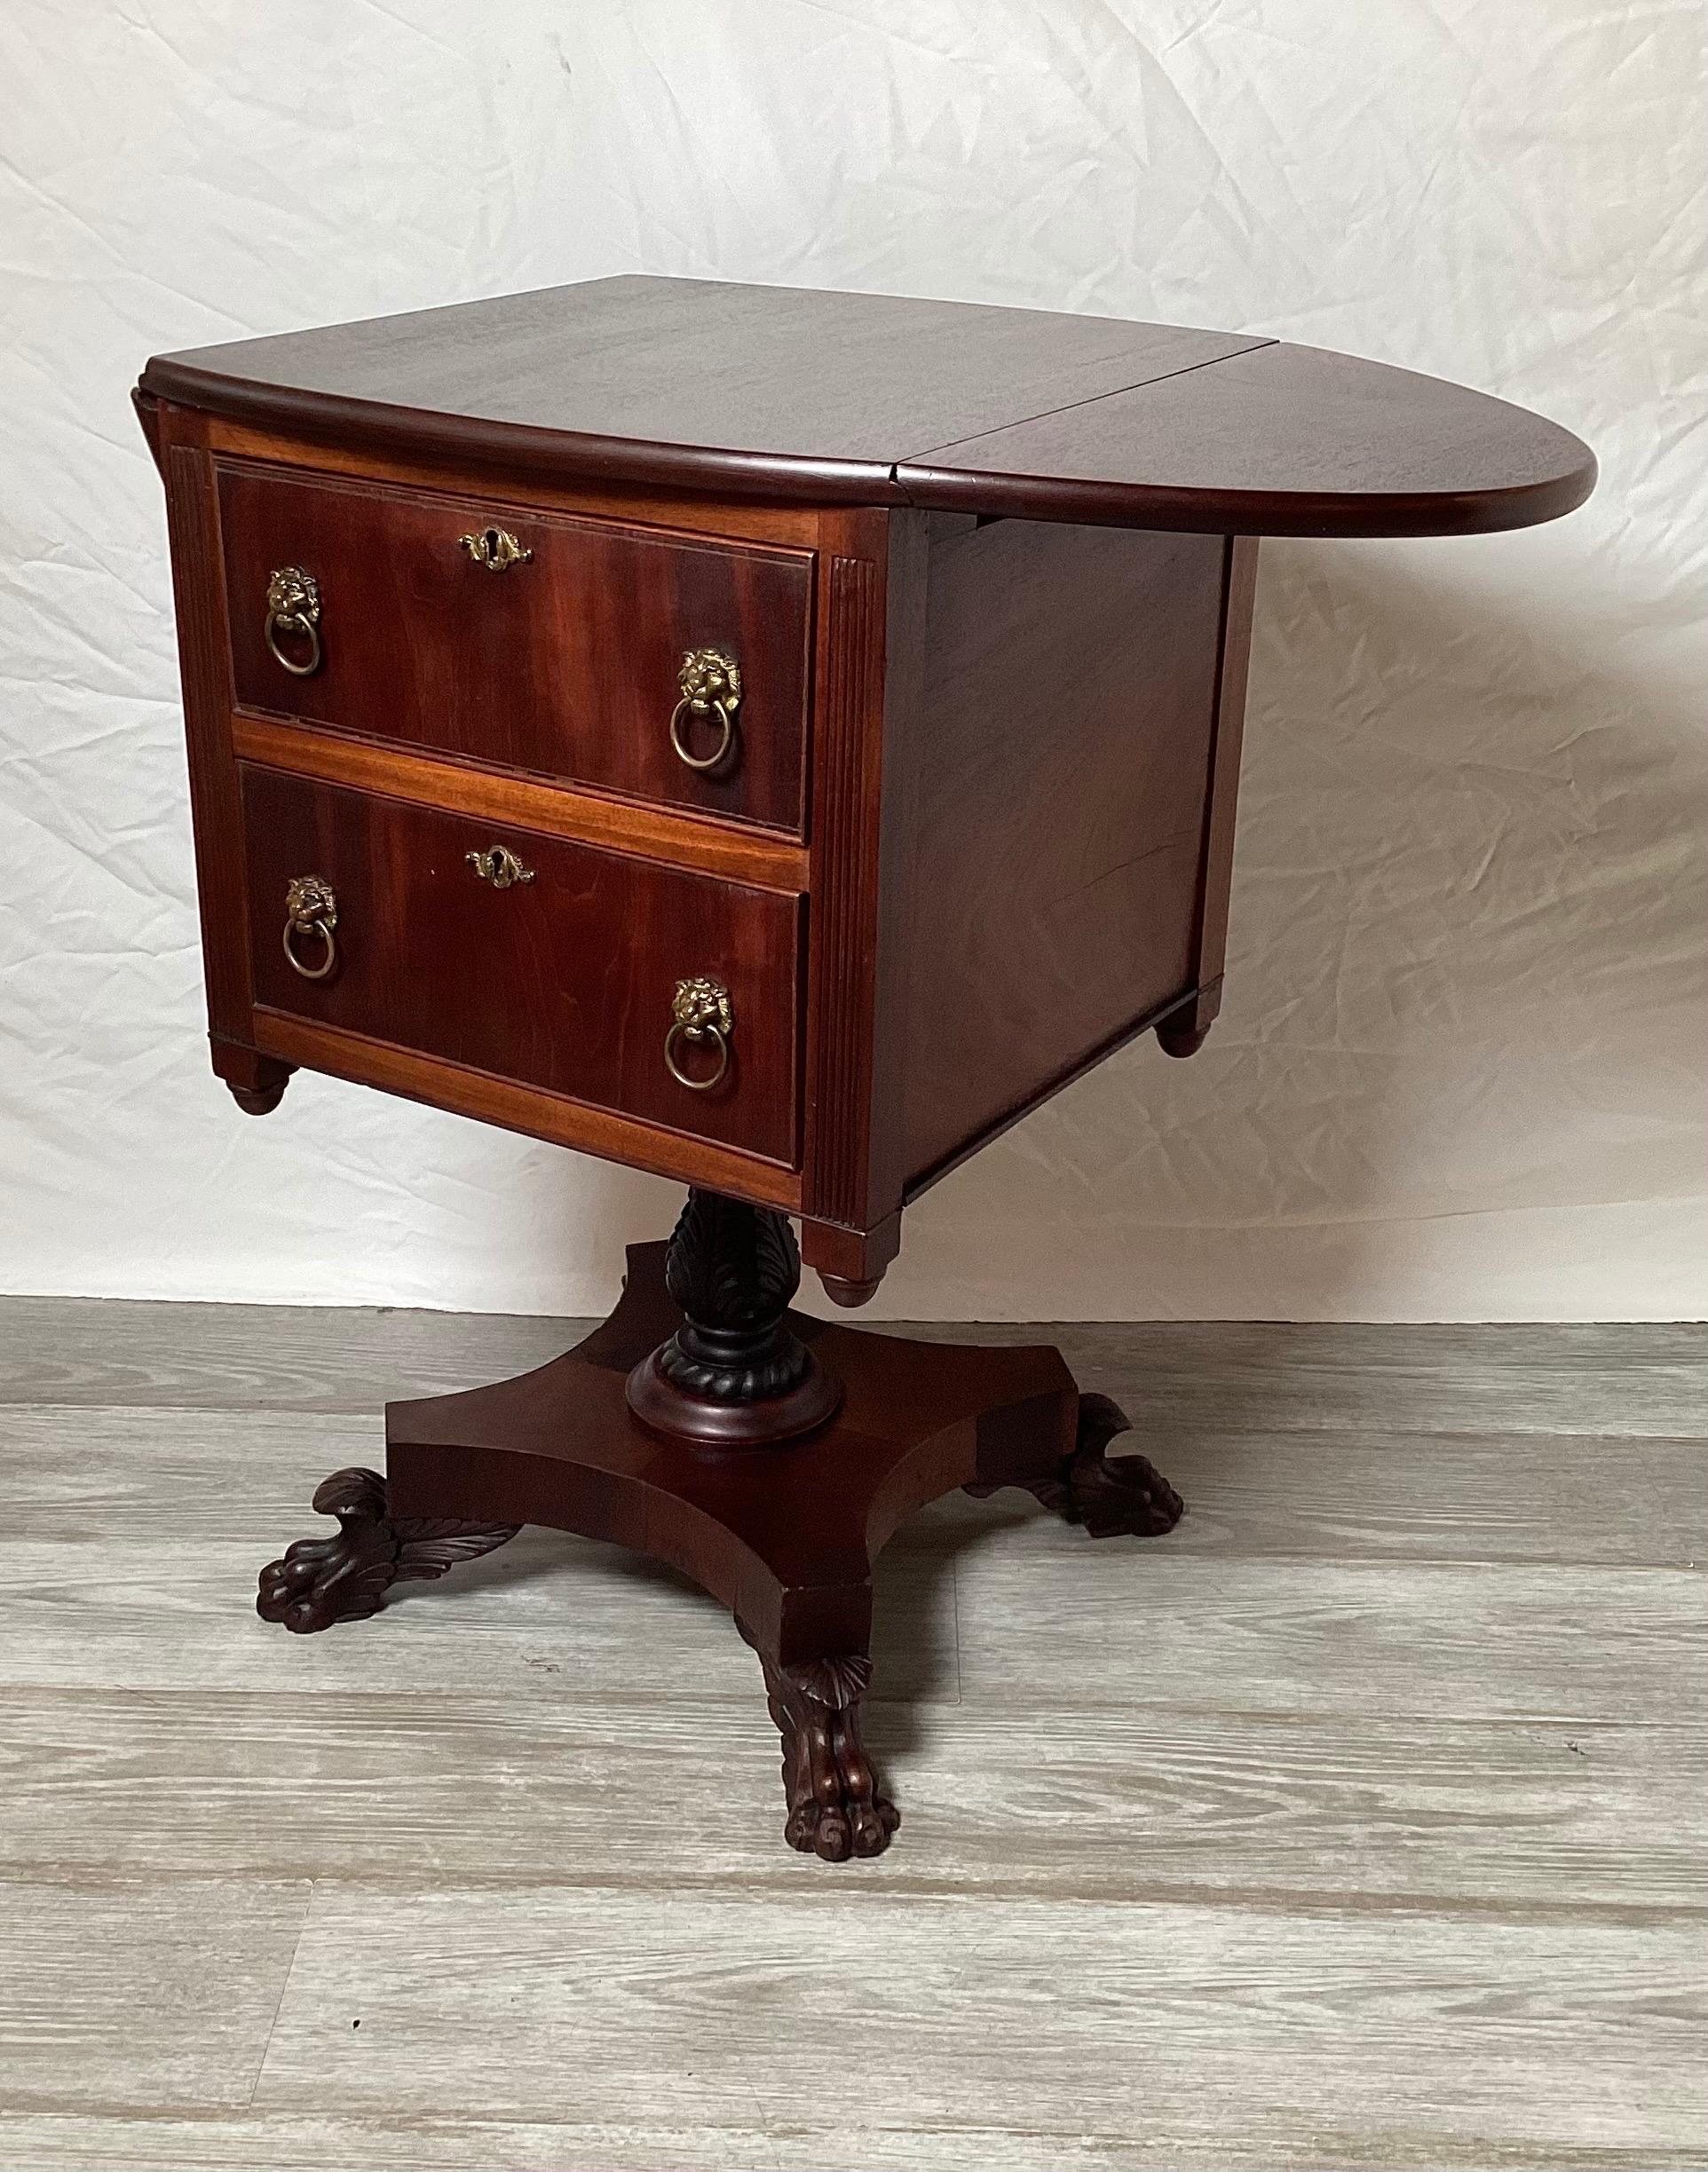 A mid 19th Century Honduran Mahogany two drawered working table with hand circle drop leaves. The box form on beautifully hand carved column and footed plinth base.